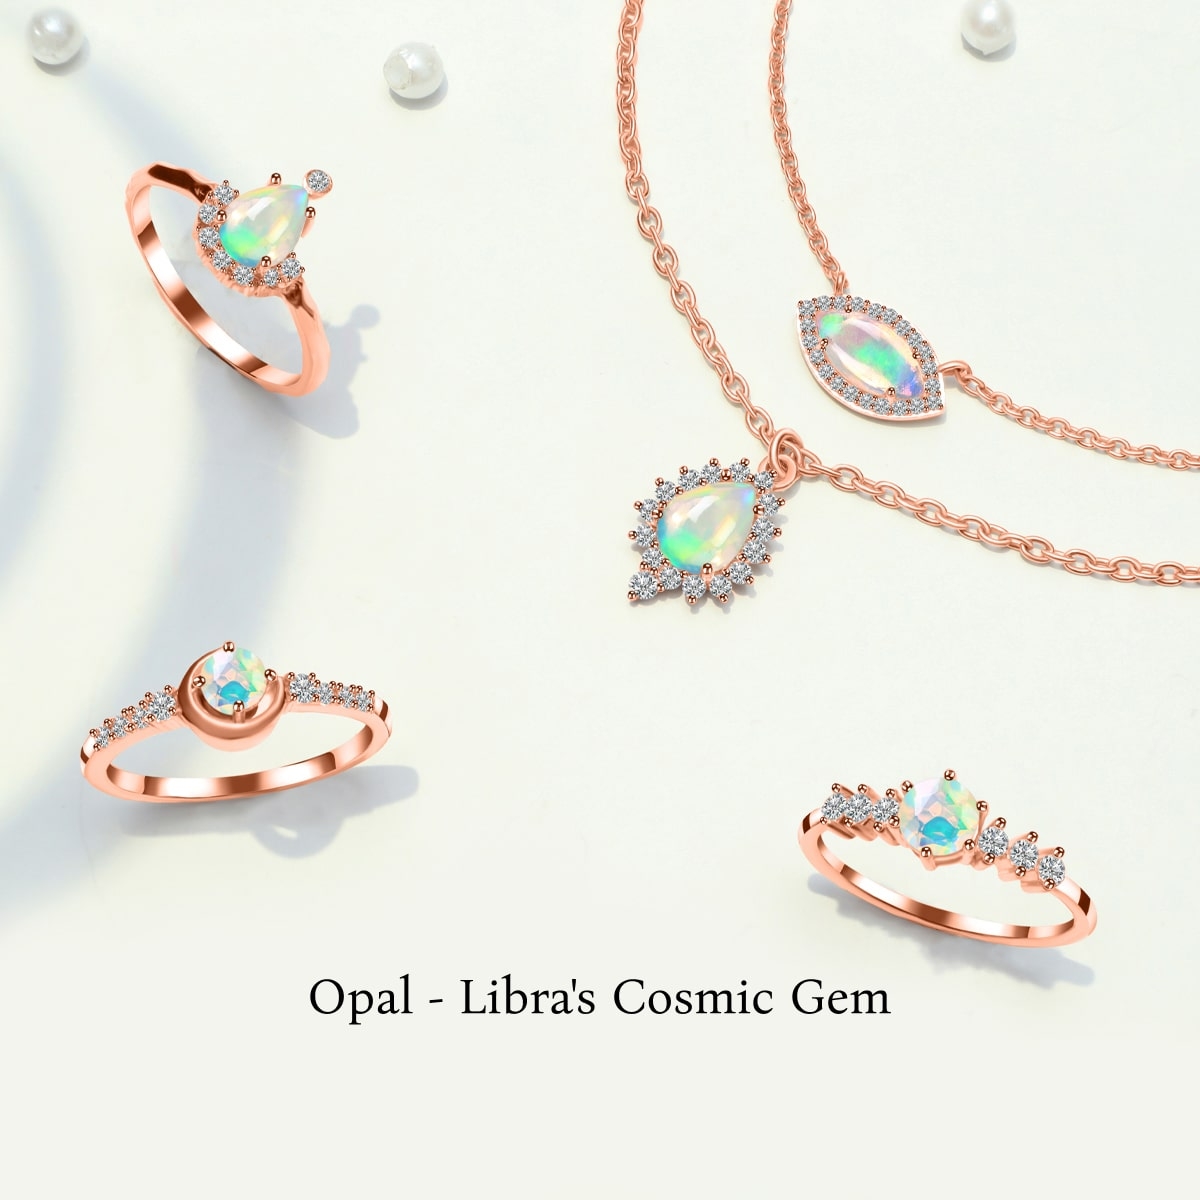 Zodiac sign associated with opal